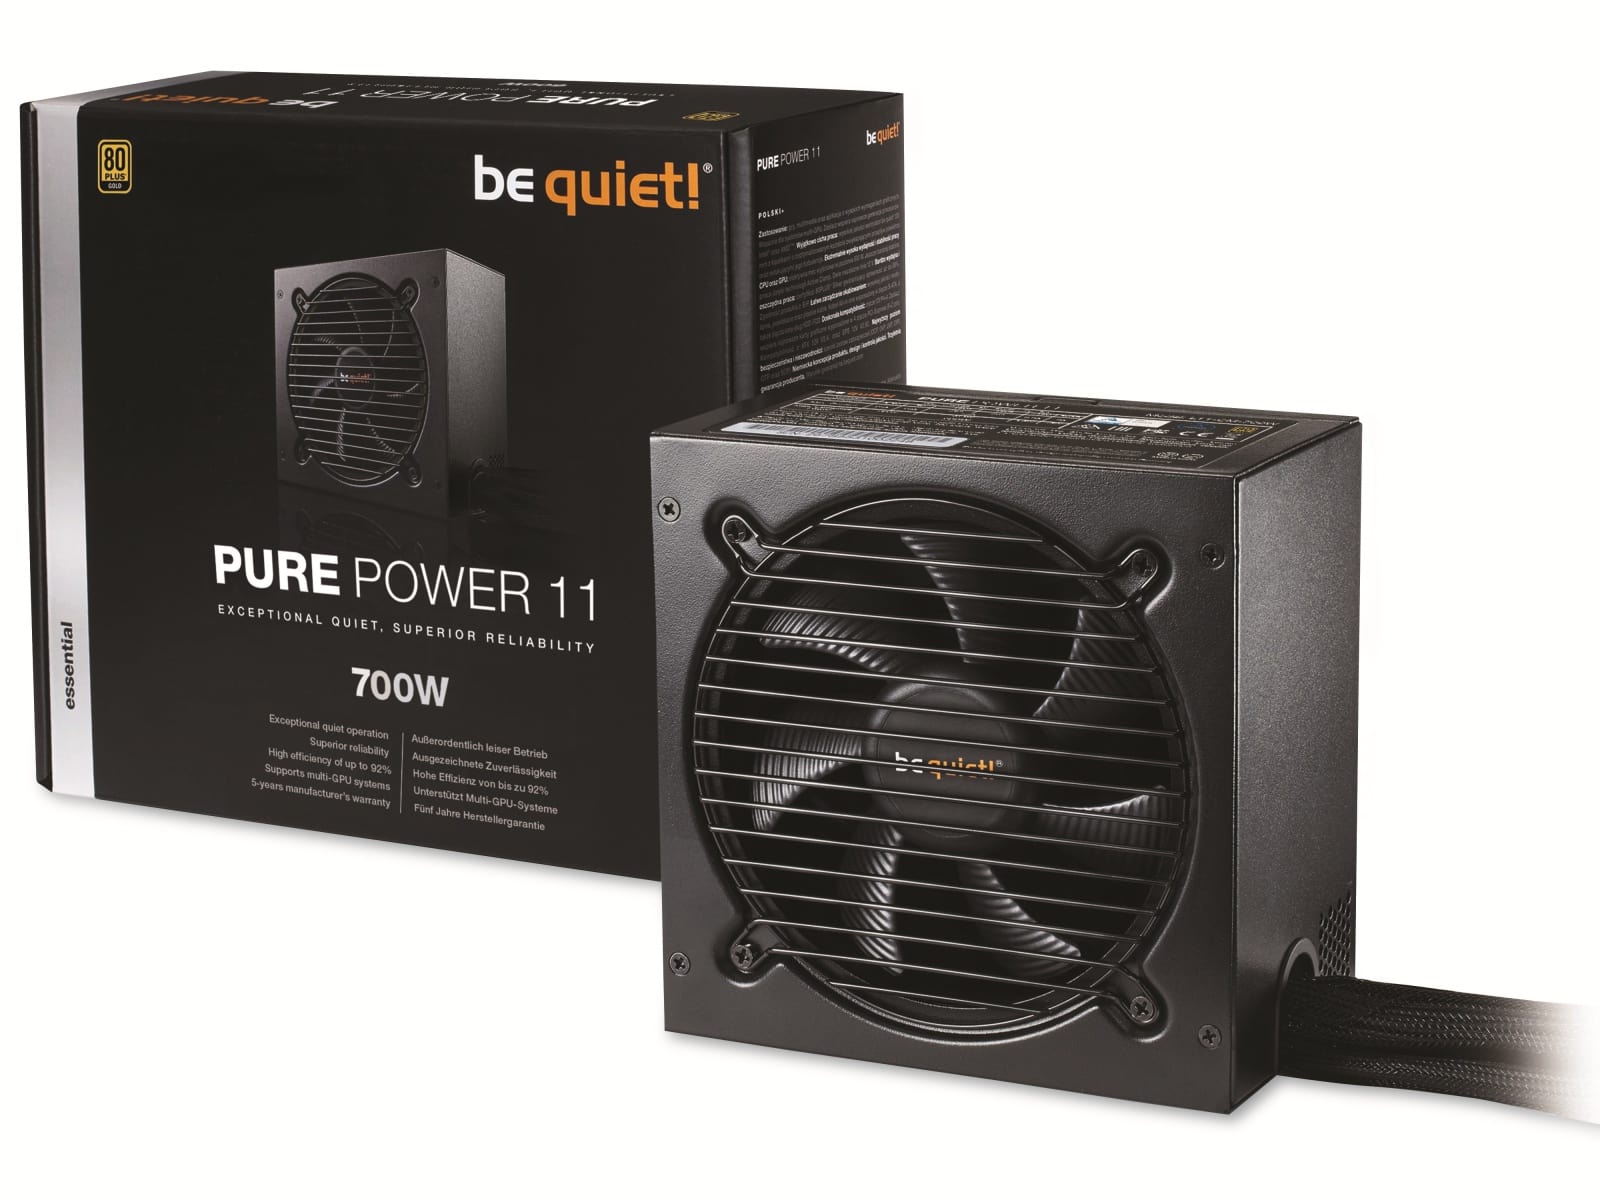 BE QUIET! PC-Netzteil Pure Power 11, 700W, 80+ Gold